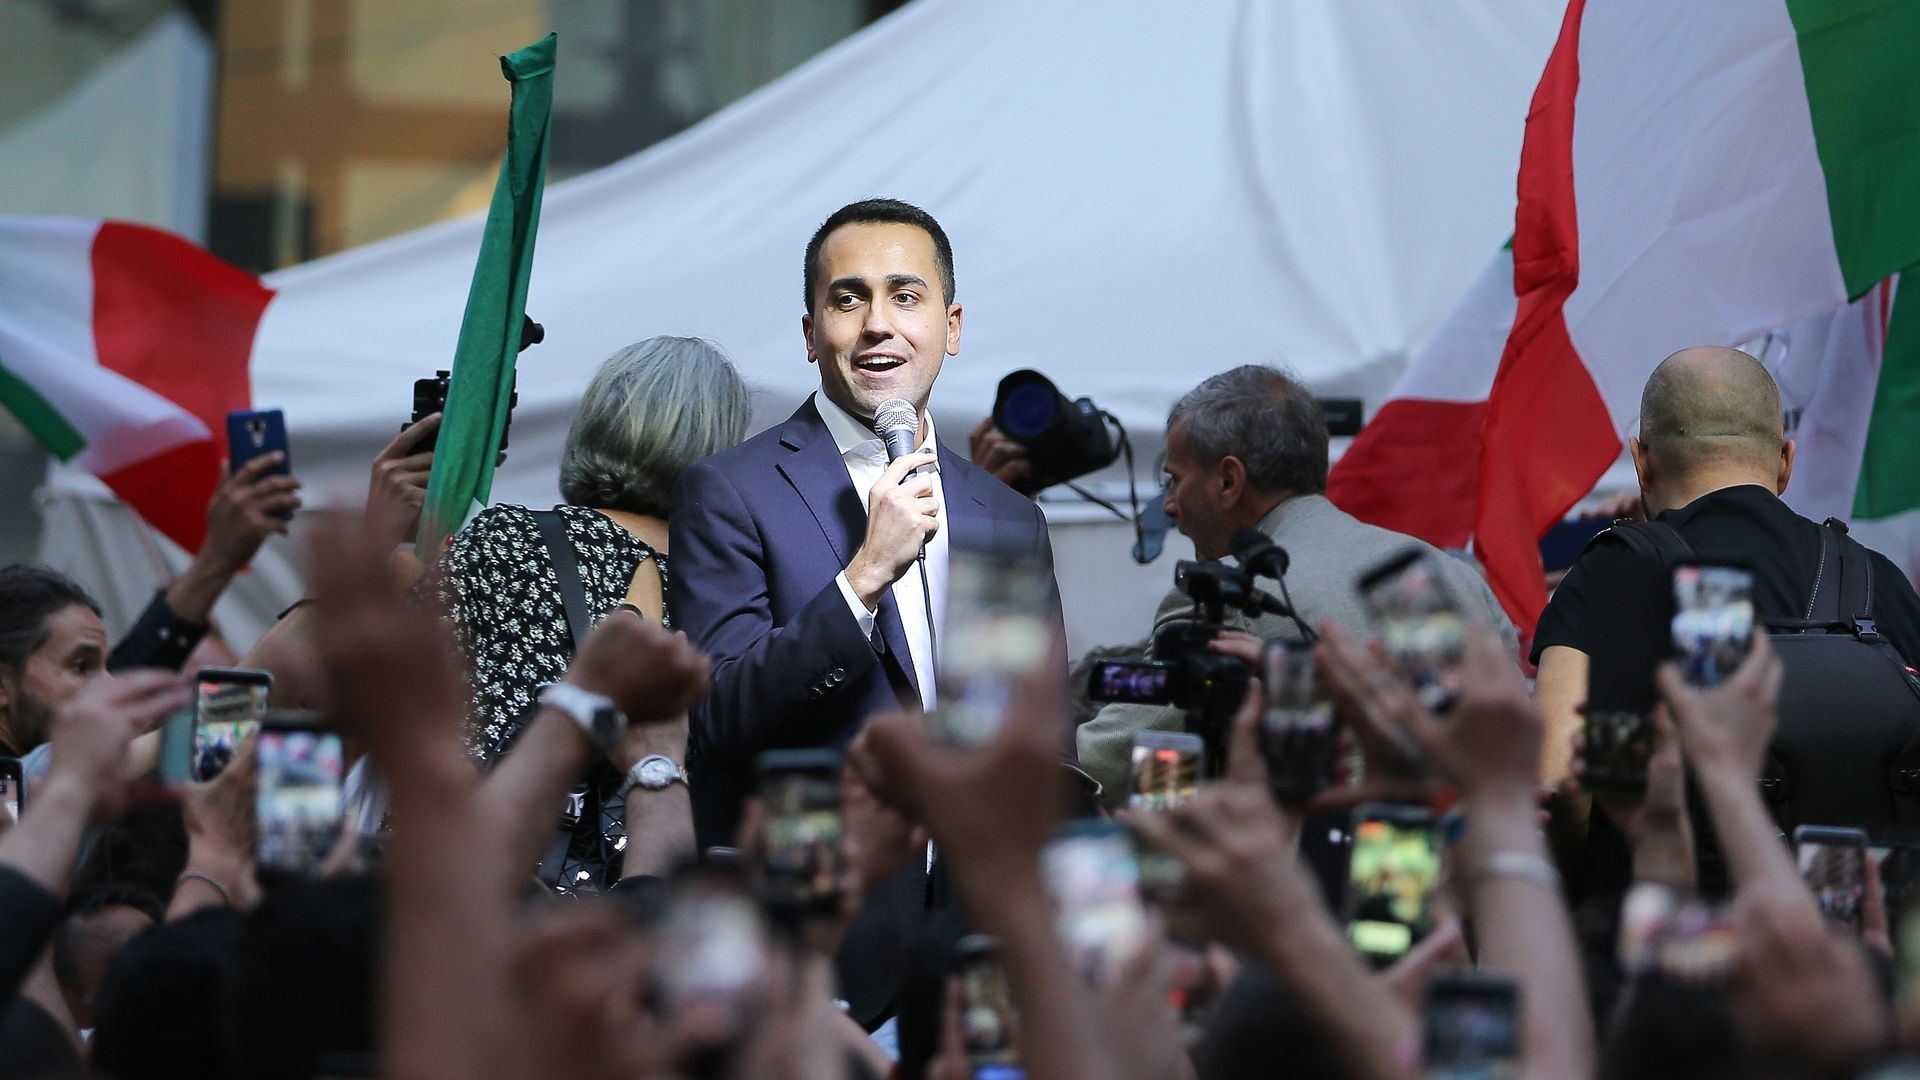 Political leader of the 5 Star Movement, Luigi Di Maio, speaks to the crowd during a meeting in Naples